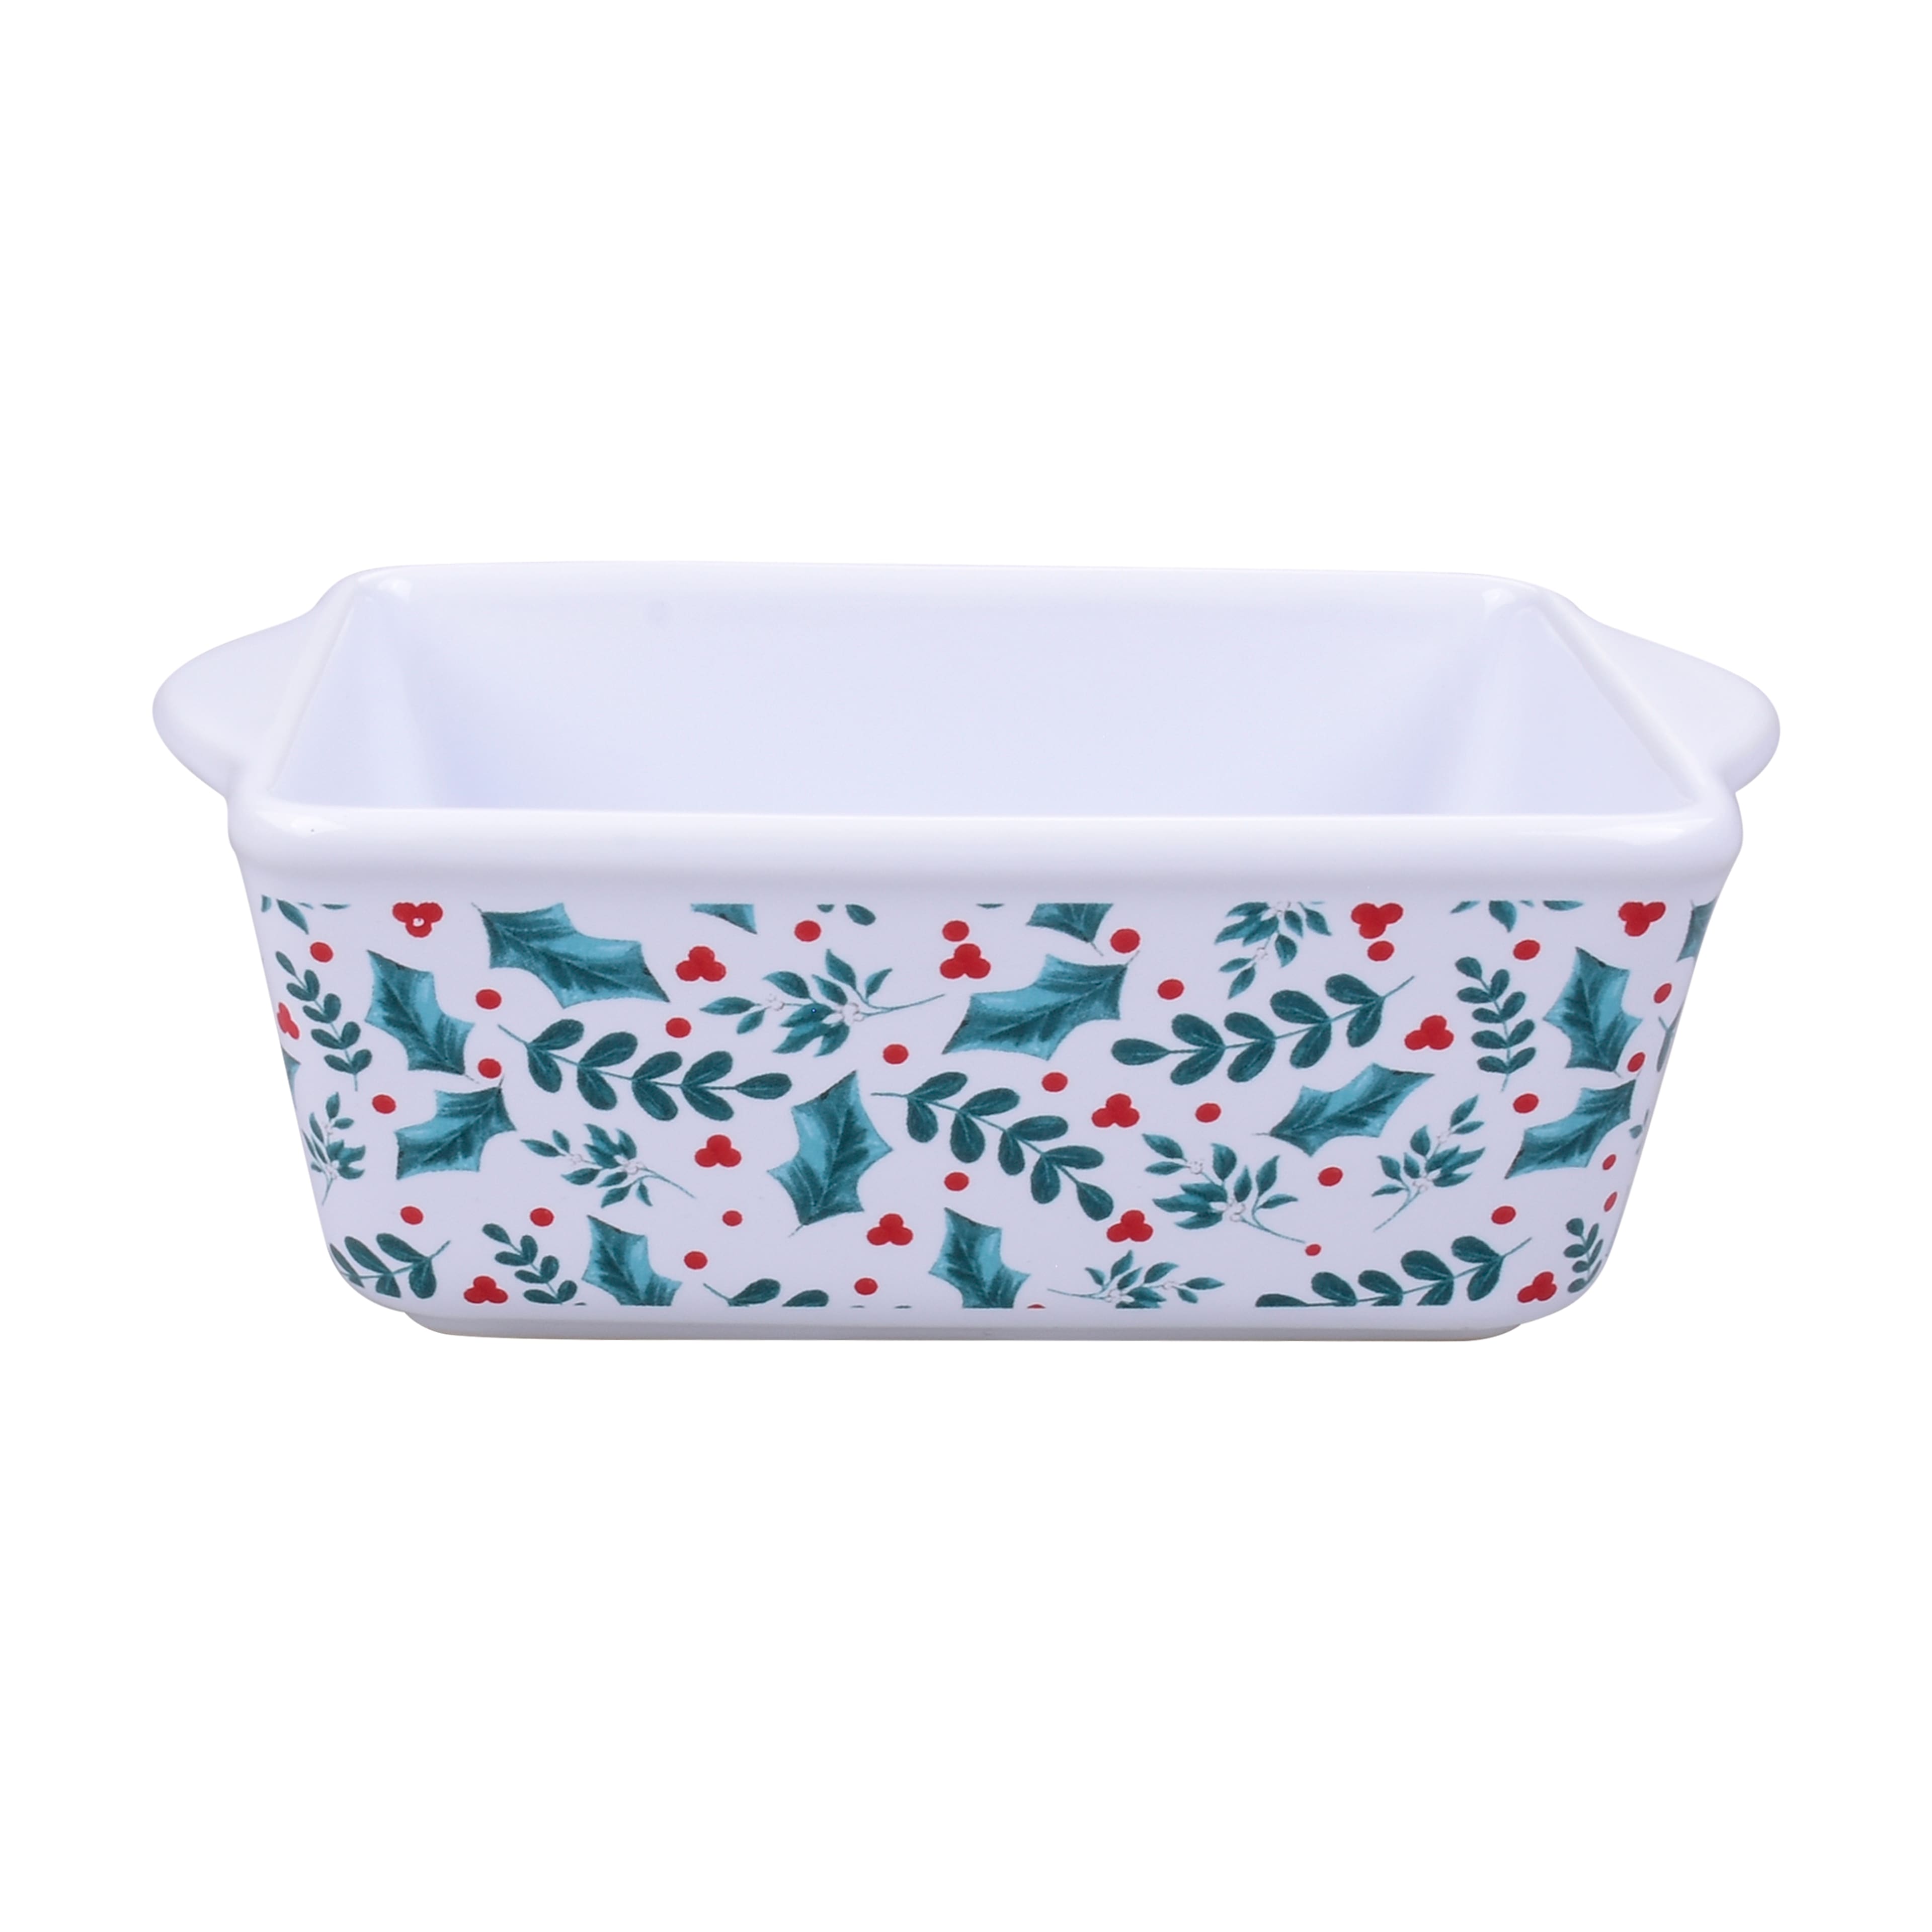 Michaels $3 Mini Ceramic Loaf Pan Has Shoppers Stocking Up - Parade